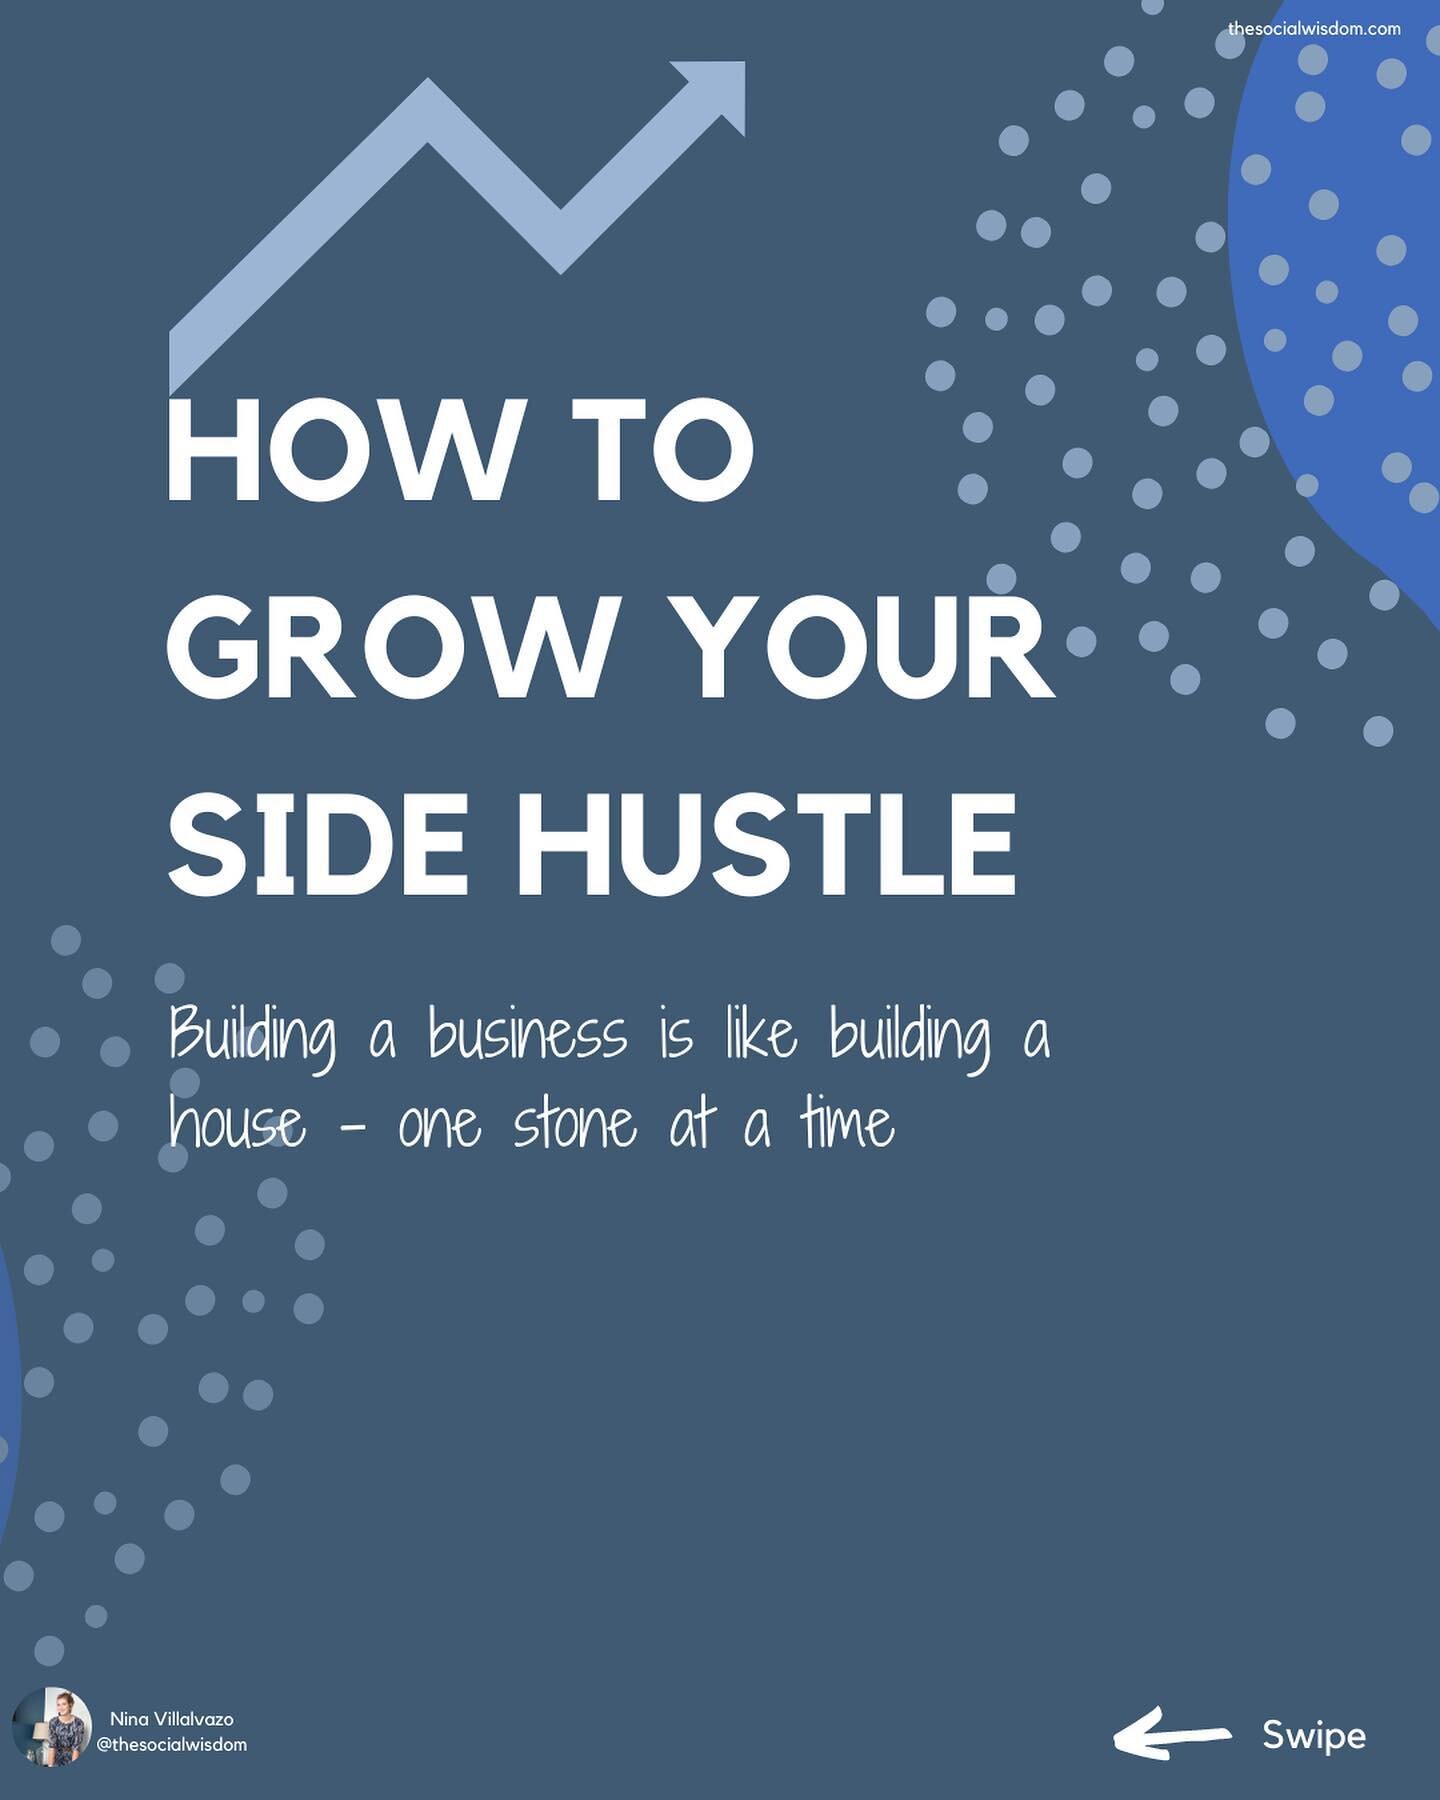 My Business &quot;The Social Wisdom&quot; is all about teaching fellow bloggers and small business owners, just like you, the organic approach to creating a lucrative side hustle. 💸  Whether you are just starting or looking for guidance on how to ta